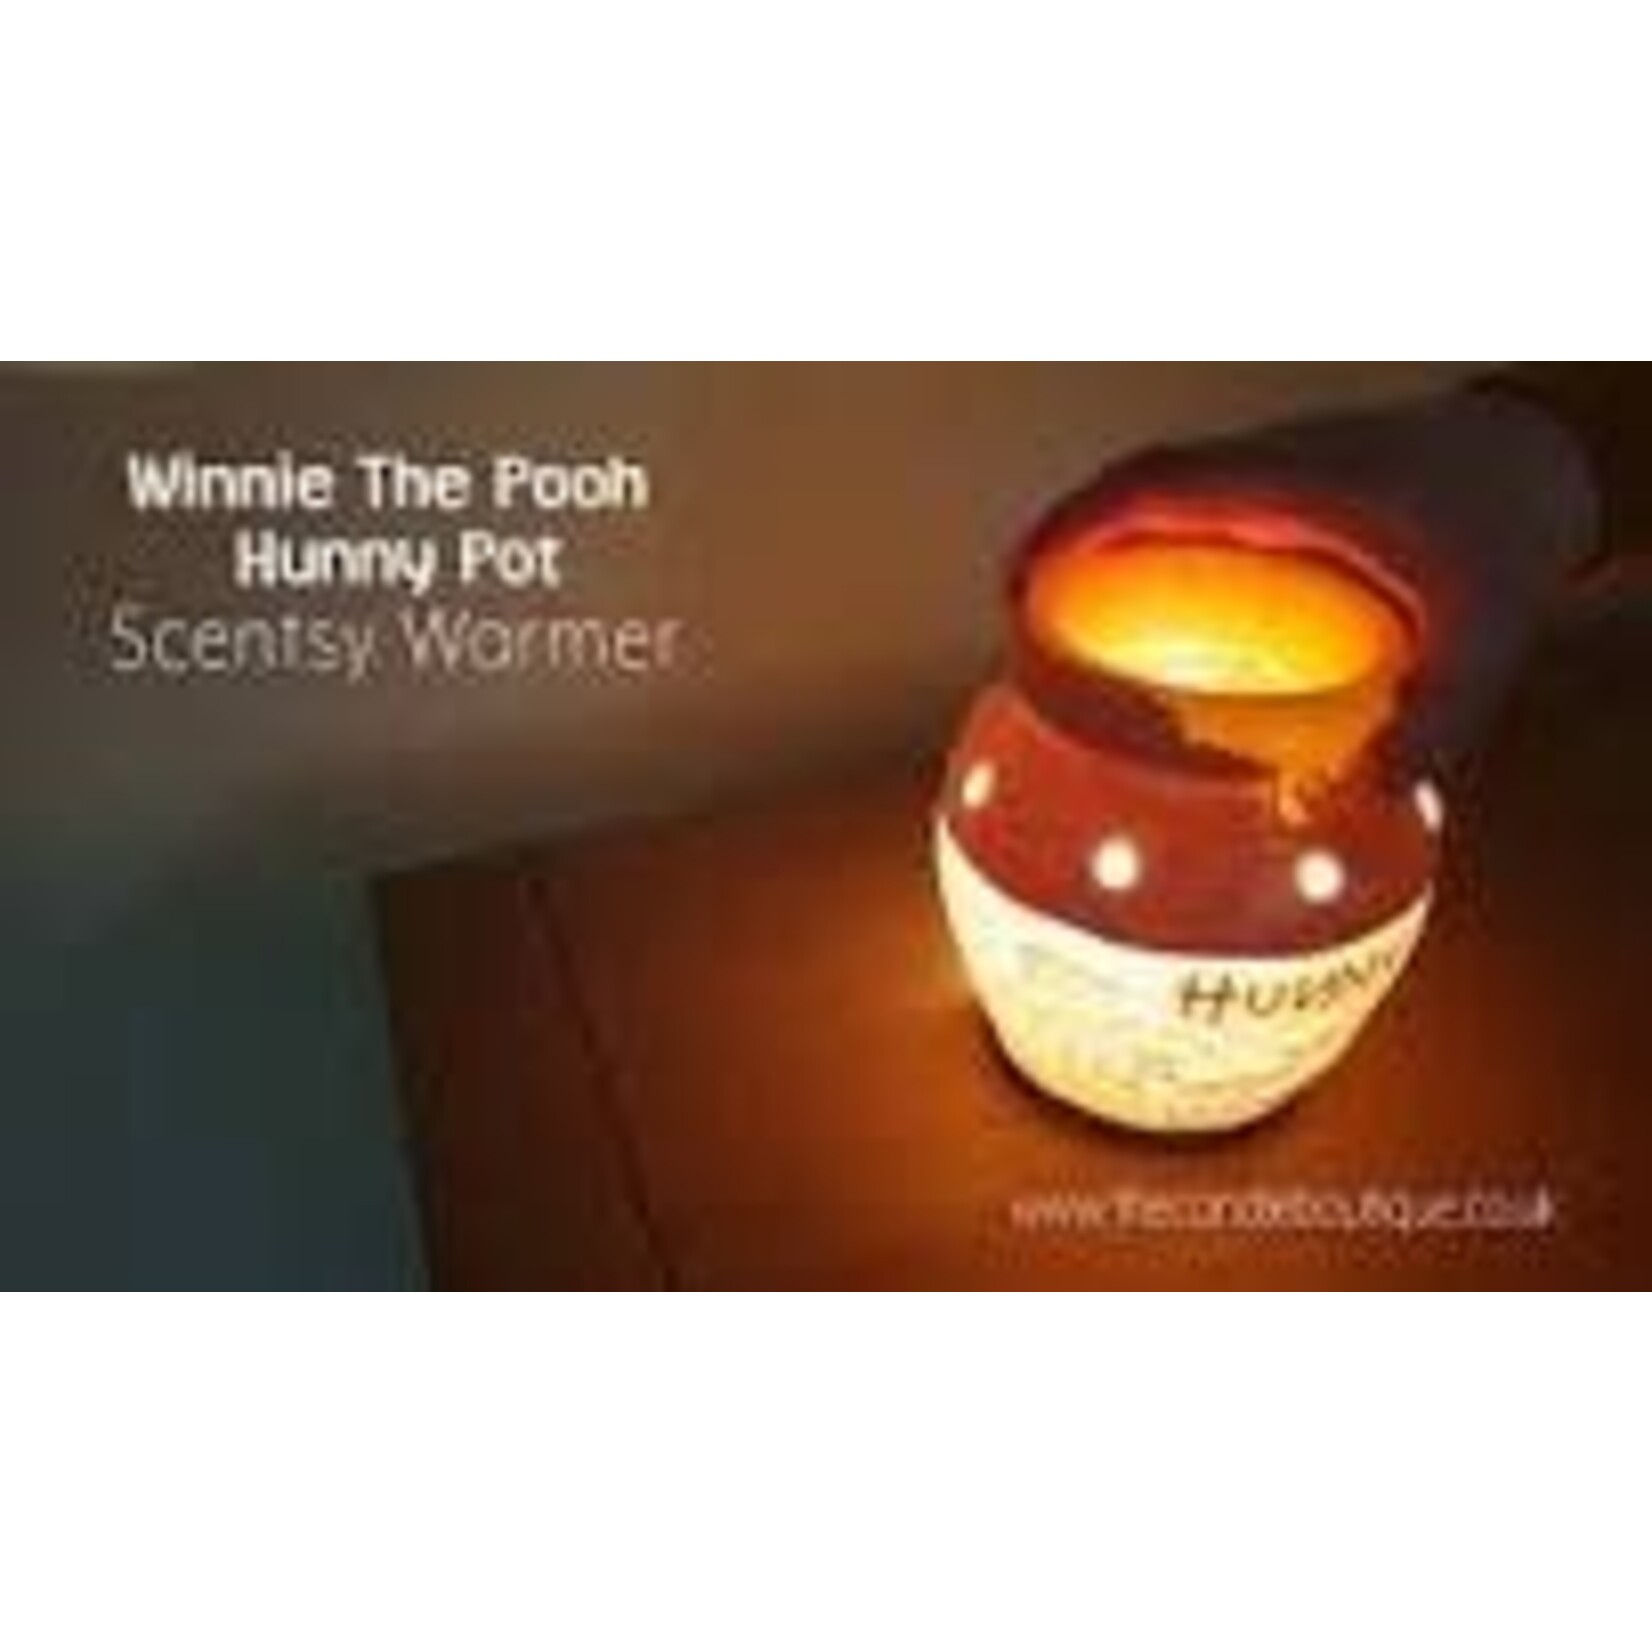 Scentsy limited edition winnie the pooh